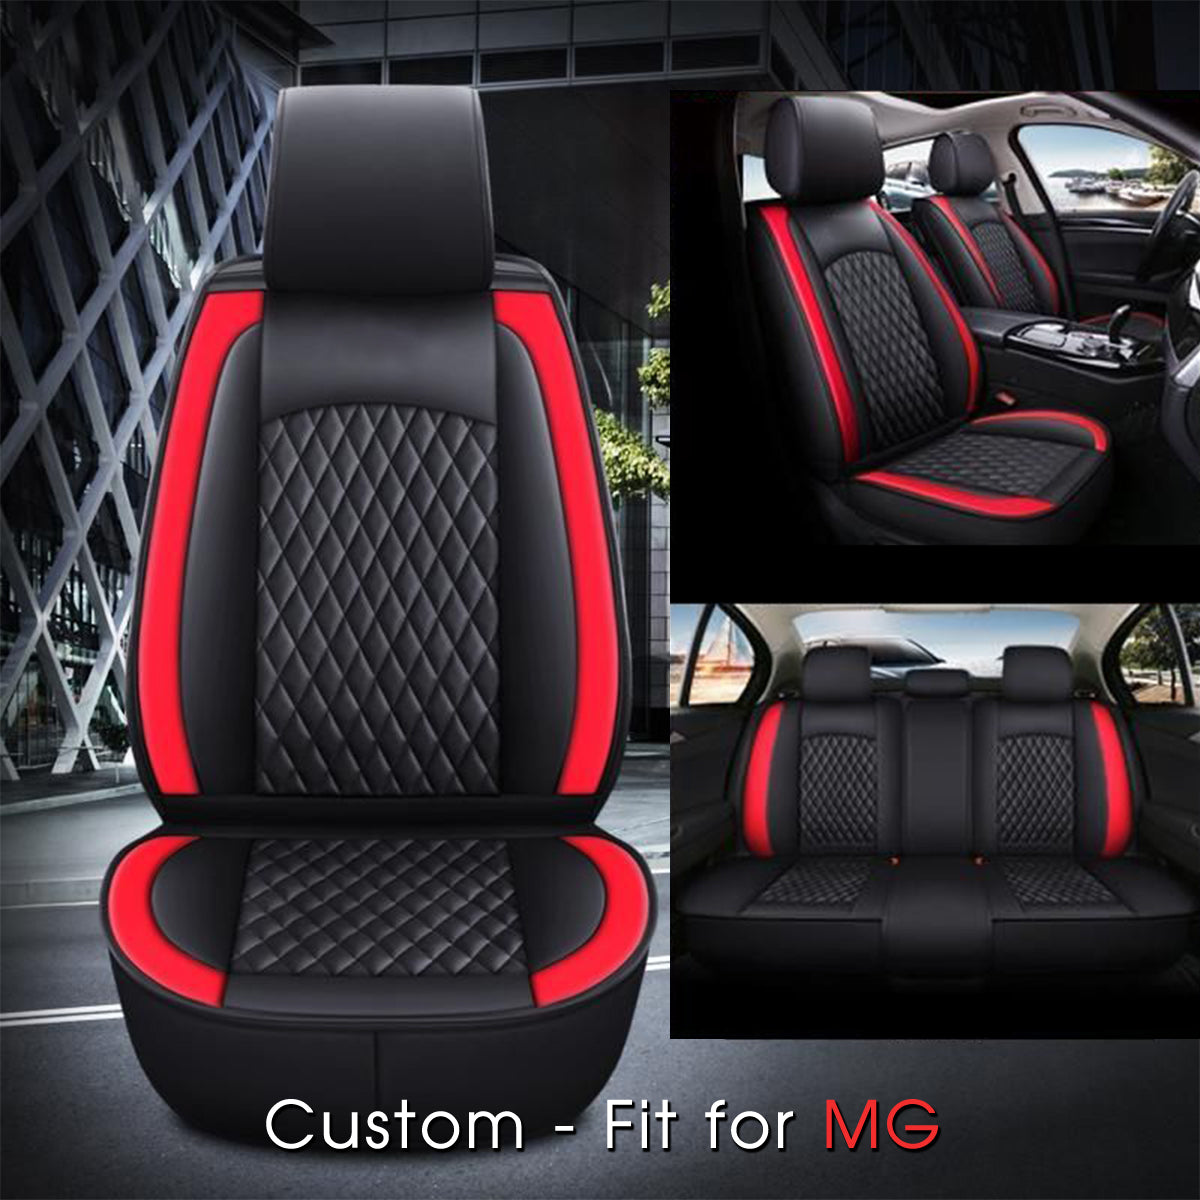 2 Car Seat Covers Full Set, Custom-Fit For Car, Waterproof Leather Front Rear Seat Automotive Protection Cushions, Car Accessories DLMC211